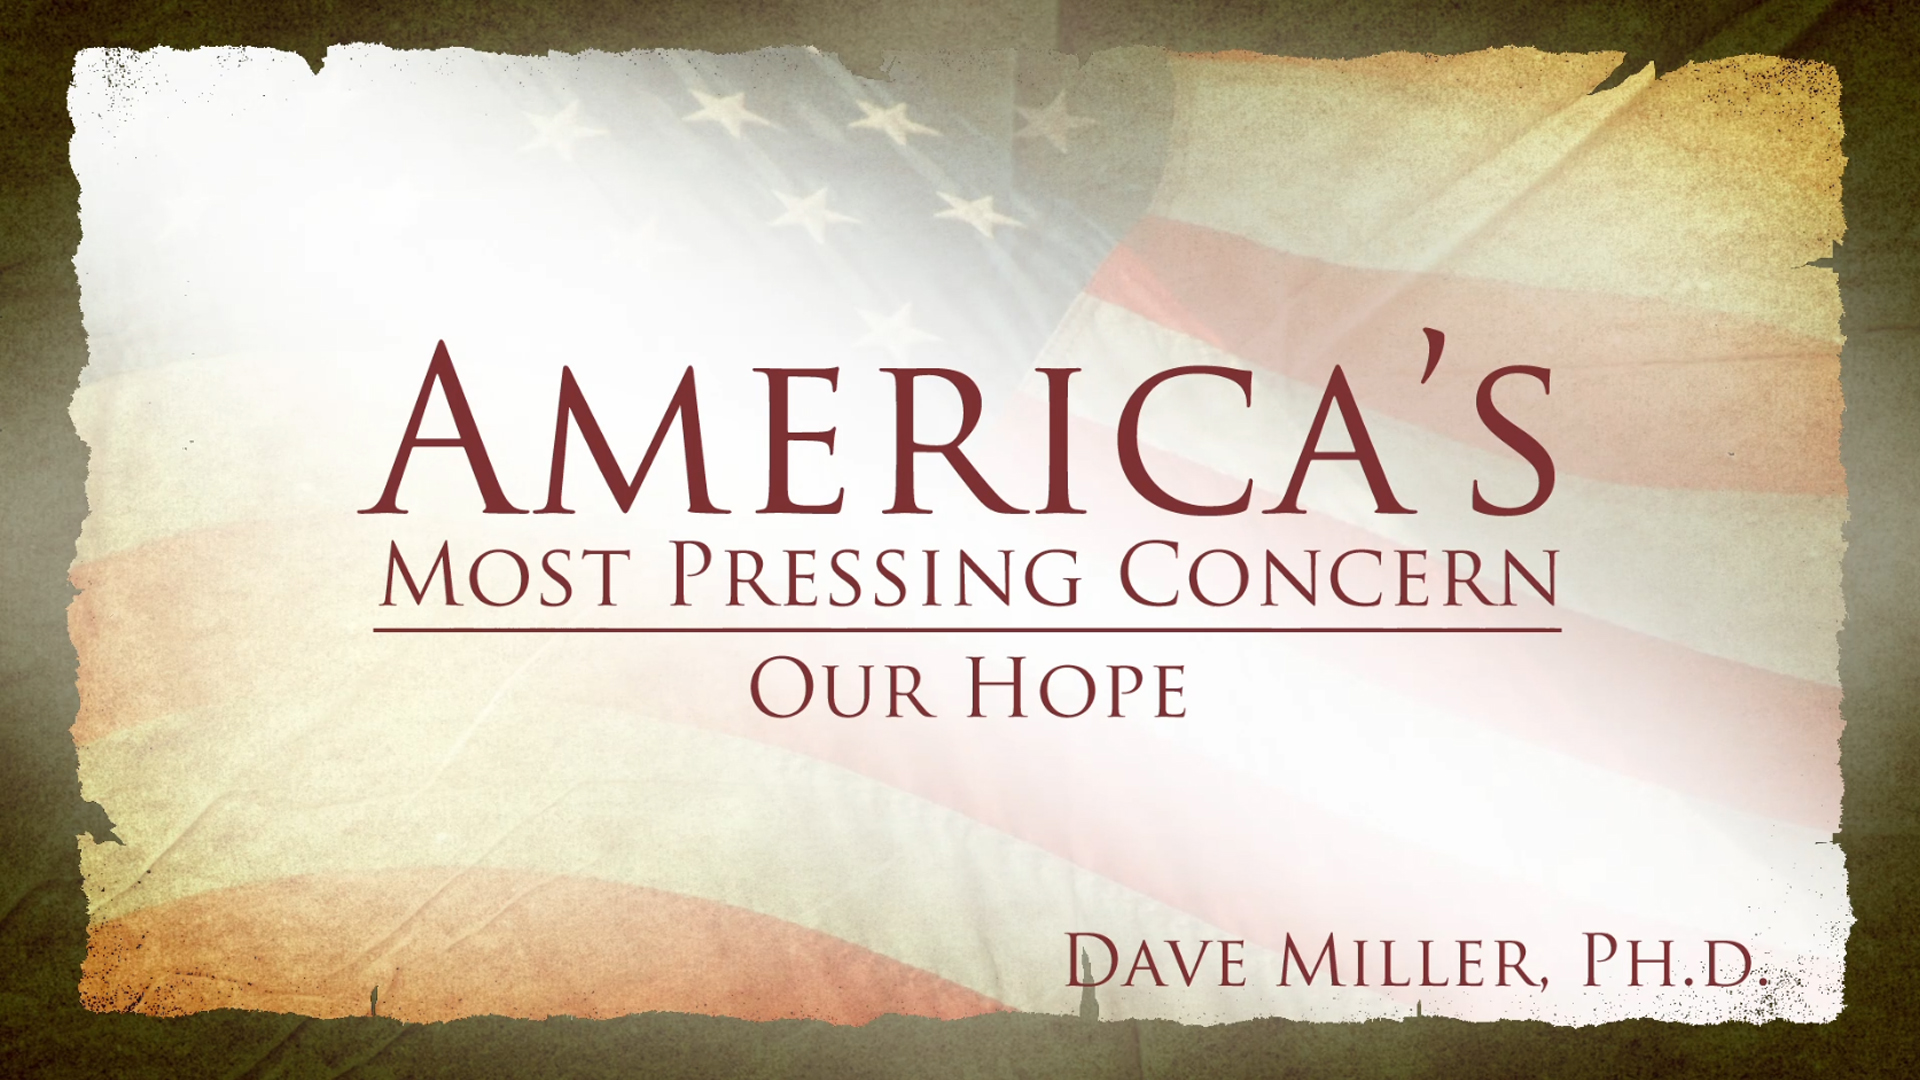 Our Hope | America's Most Pressing Concern (Dave Miller, Ph.D.)